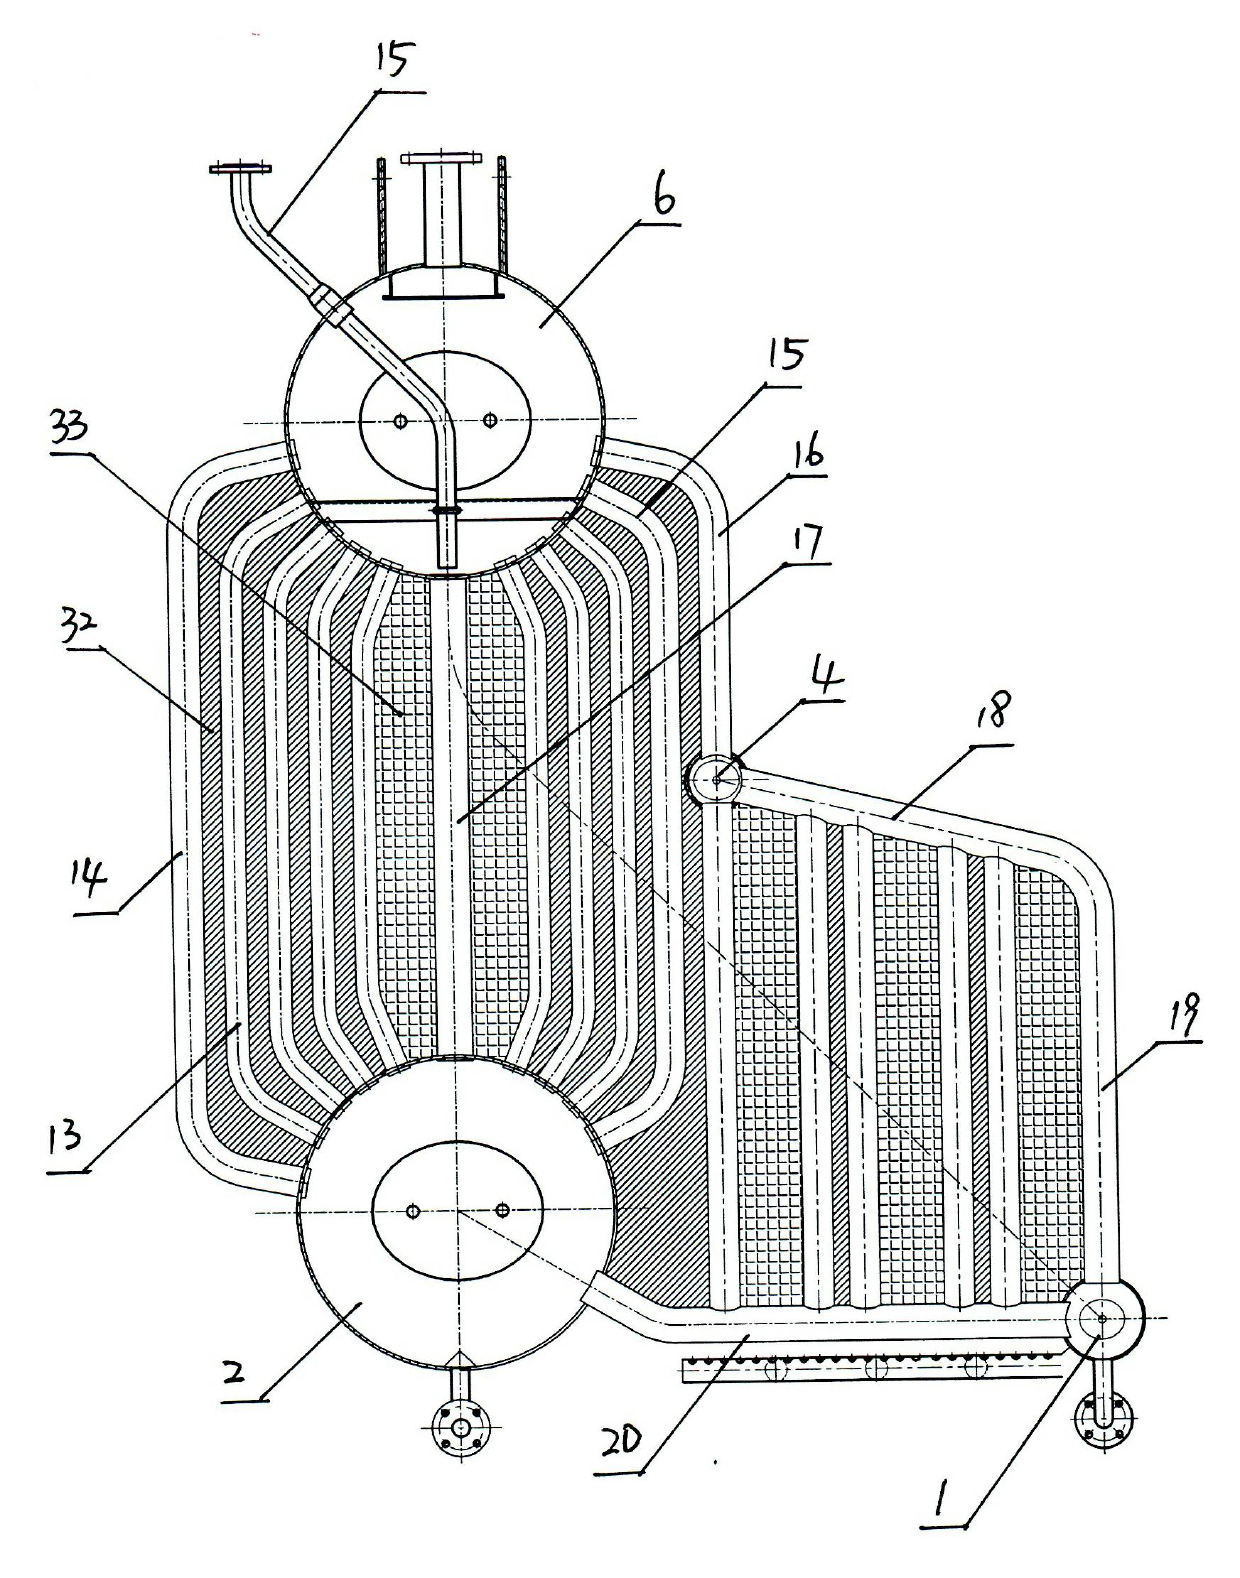 Horizontal dual-drum energy-efficient boiler without fireproofing-material furnace-building process